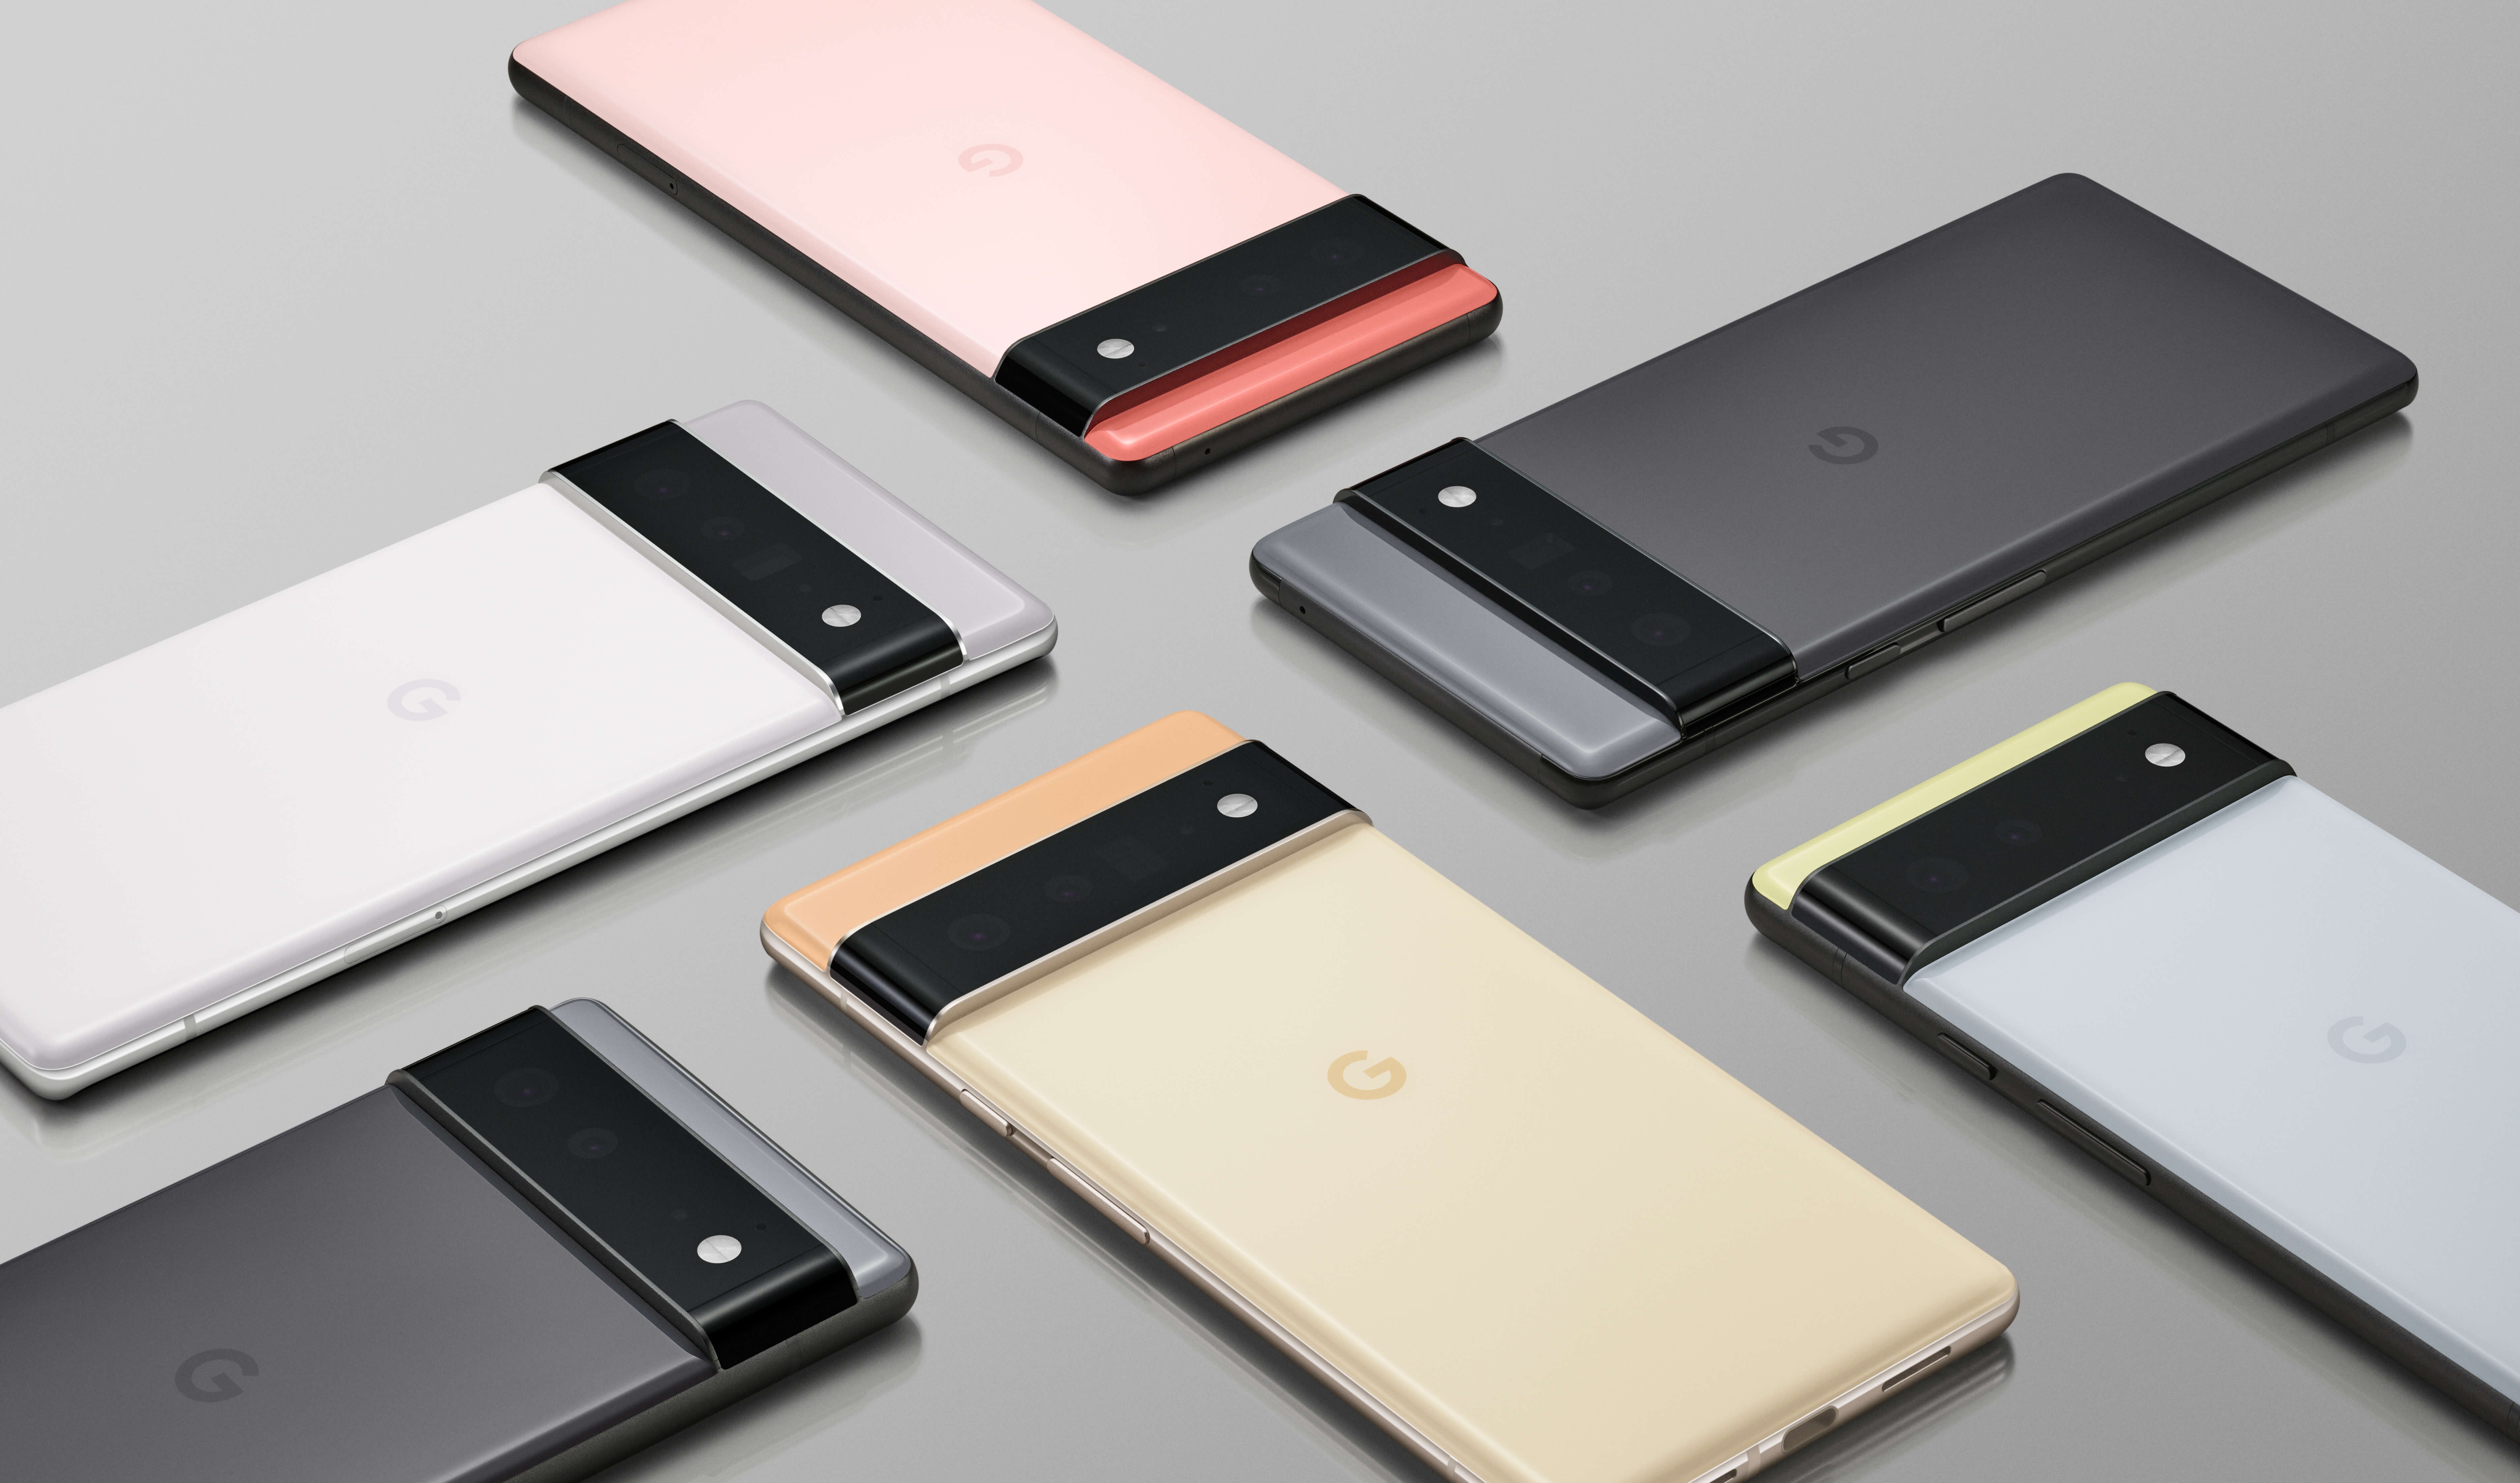 Google announces Pixel 6 and Pixel 6 Pro with custom Tensor chip